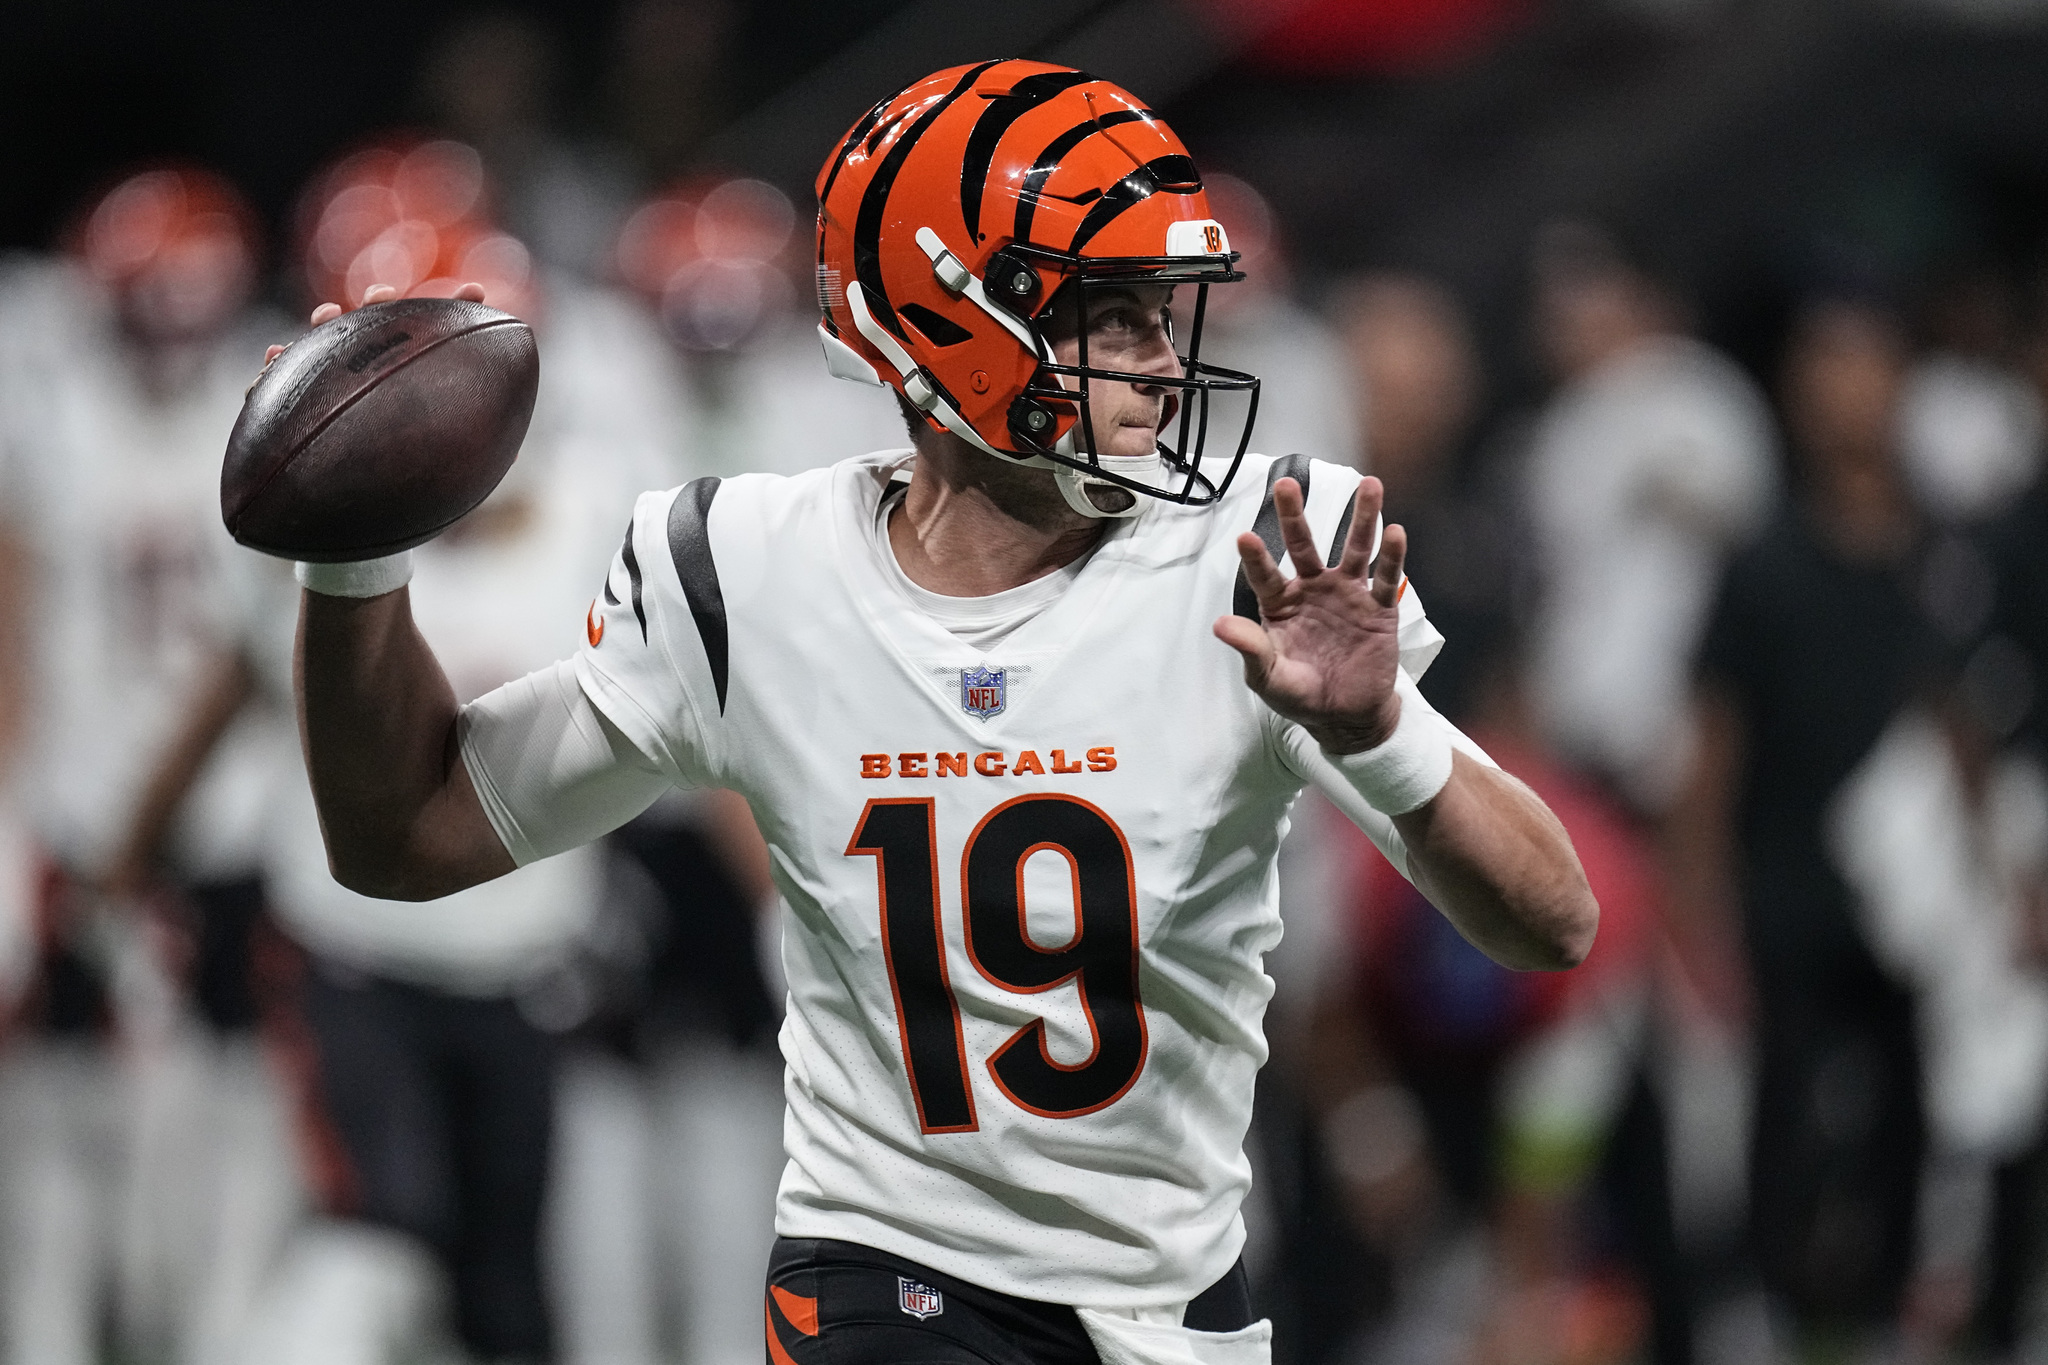 who is playing the bengals this week